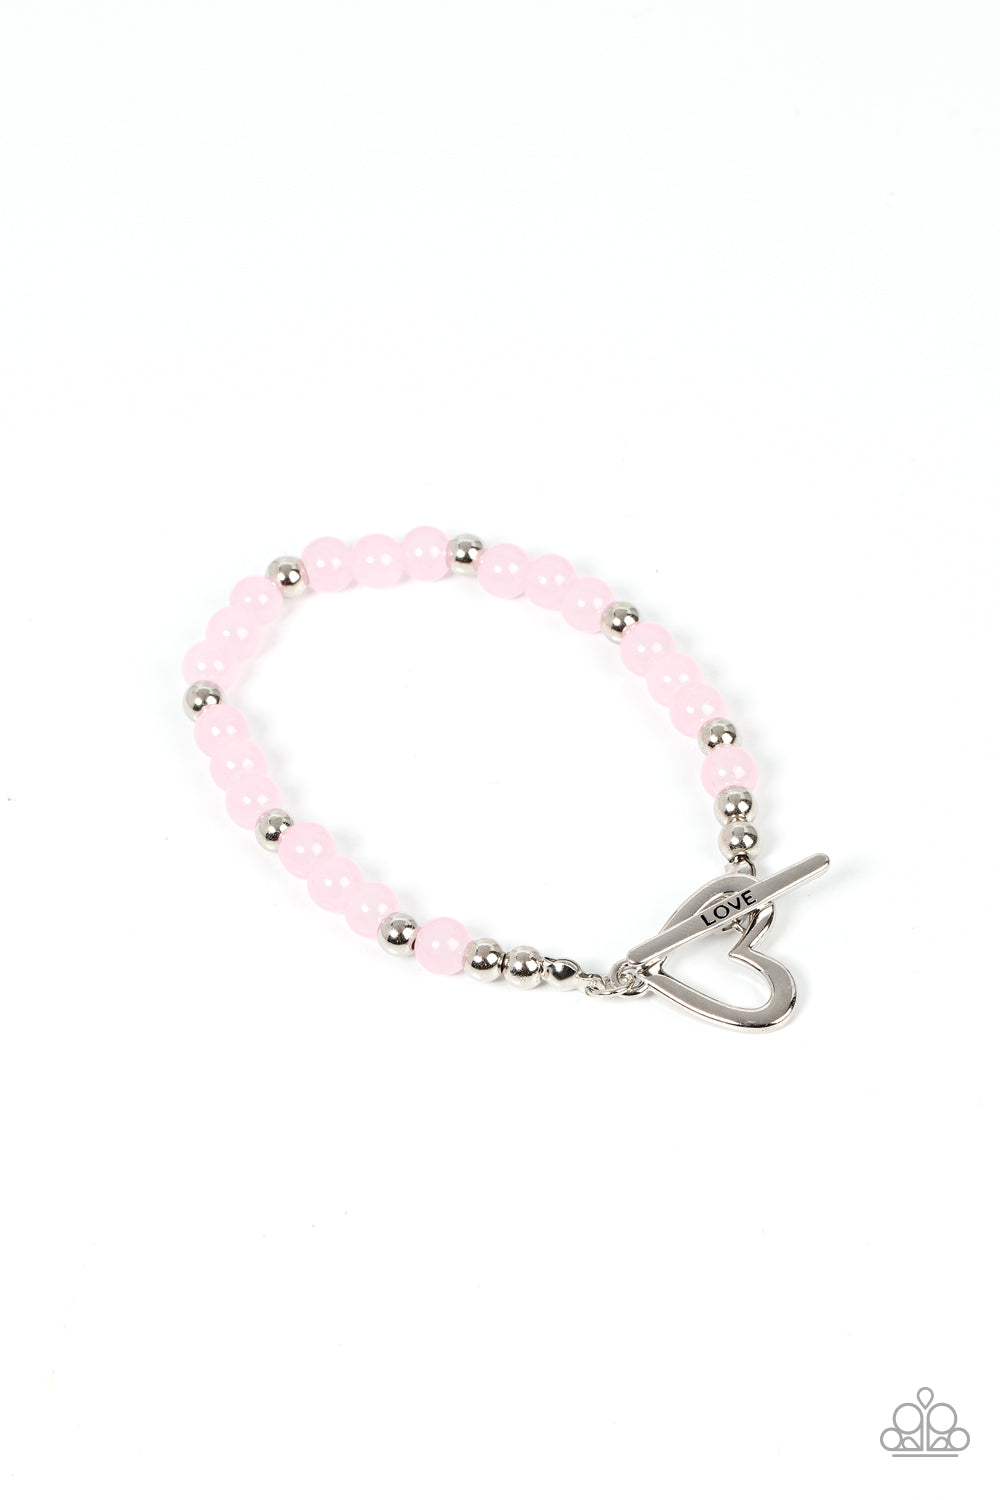 Following My Heart - Pink ***COMING SOON*** - Bling With Crystal